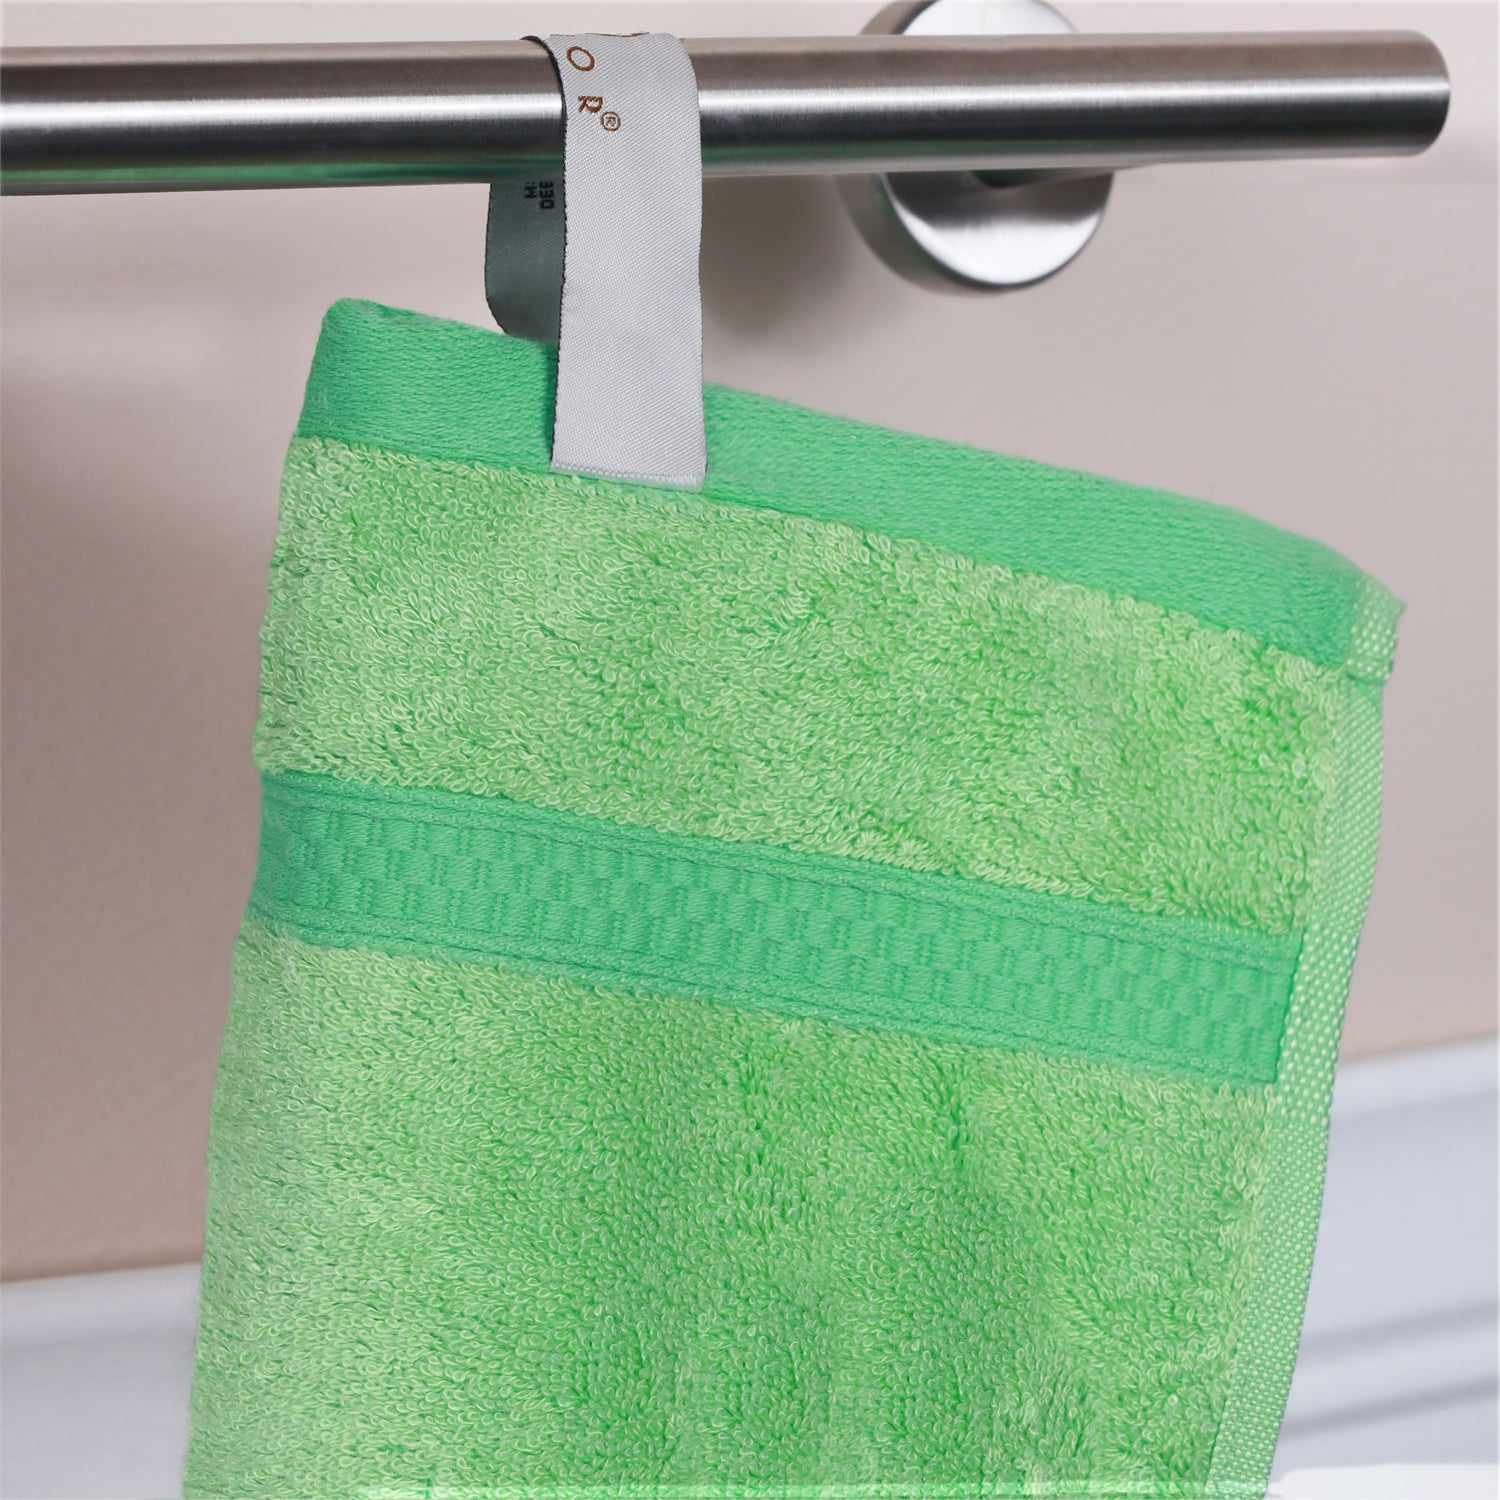  Ultra-Soft Hypoallergenic Rayon from Bamboo Cotton Blend Bath and Hand Towel Set -  Spring Green